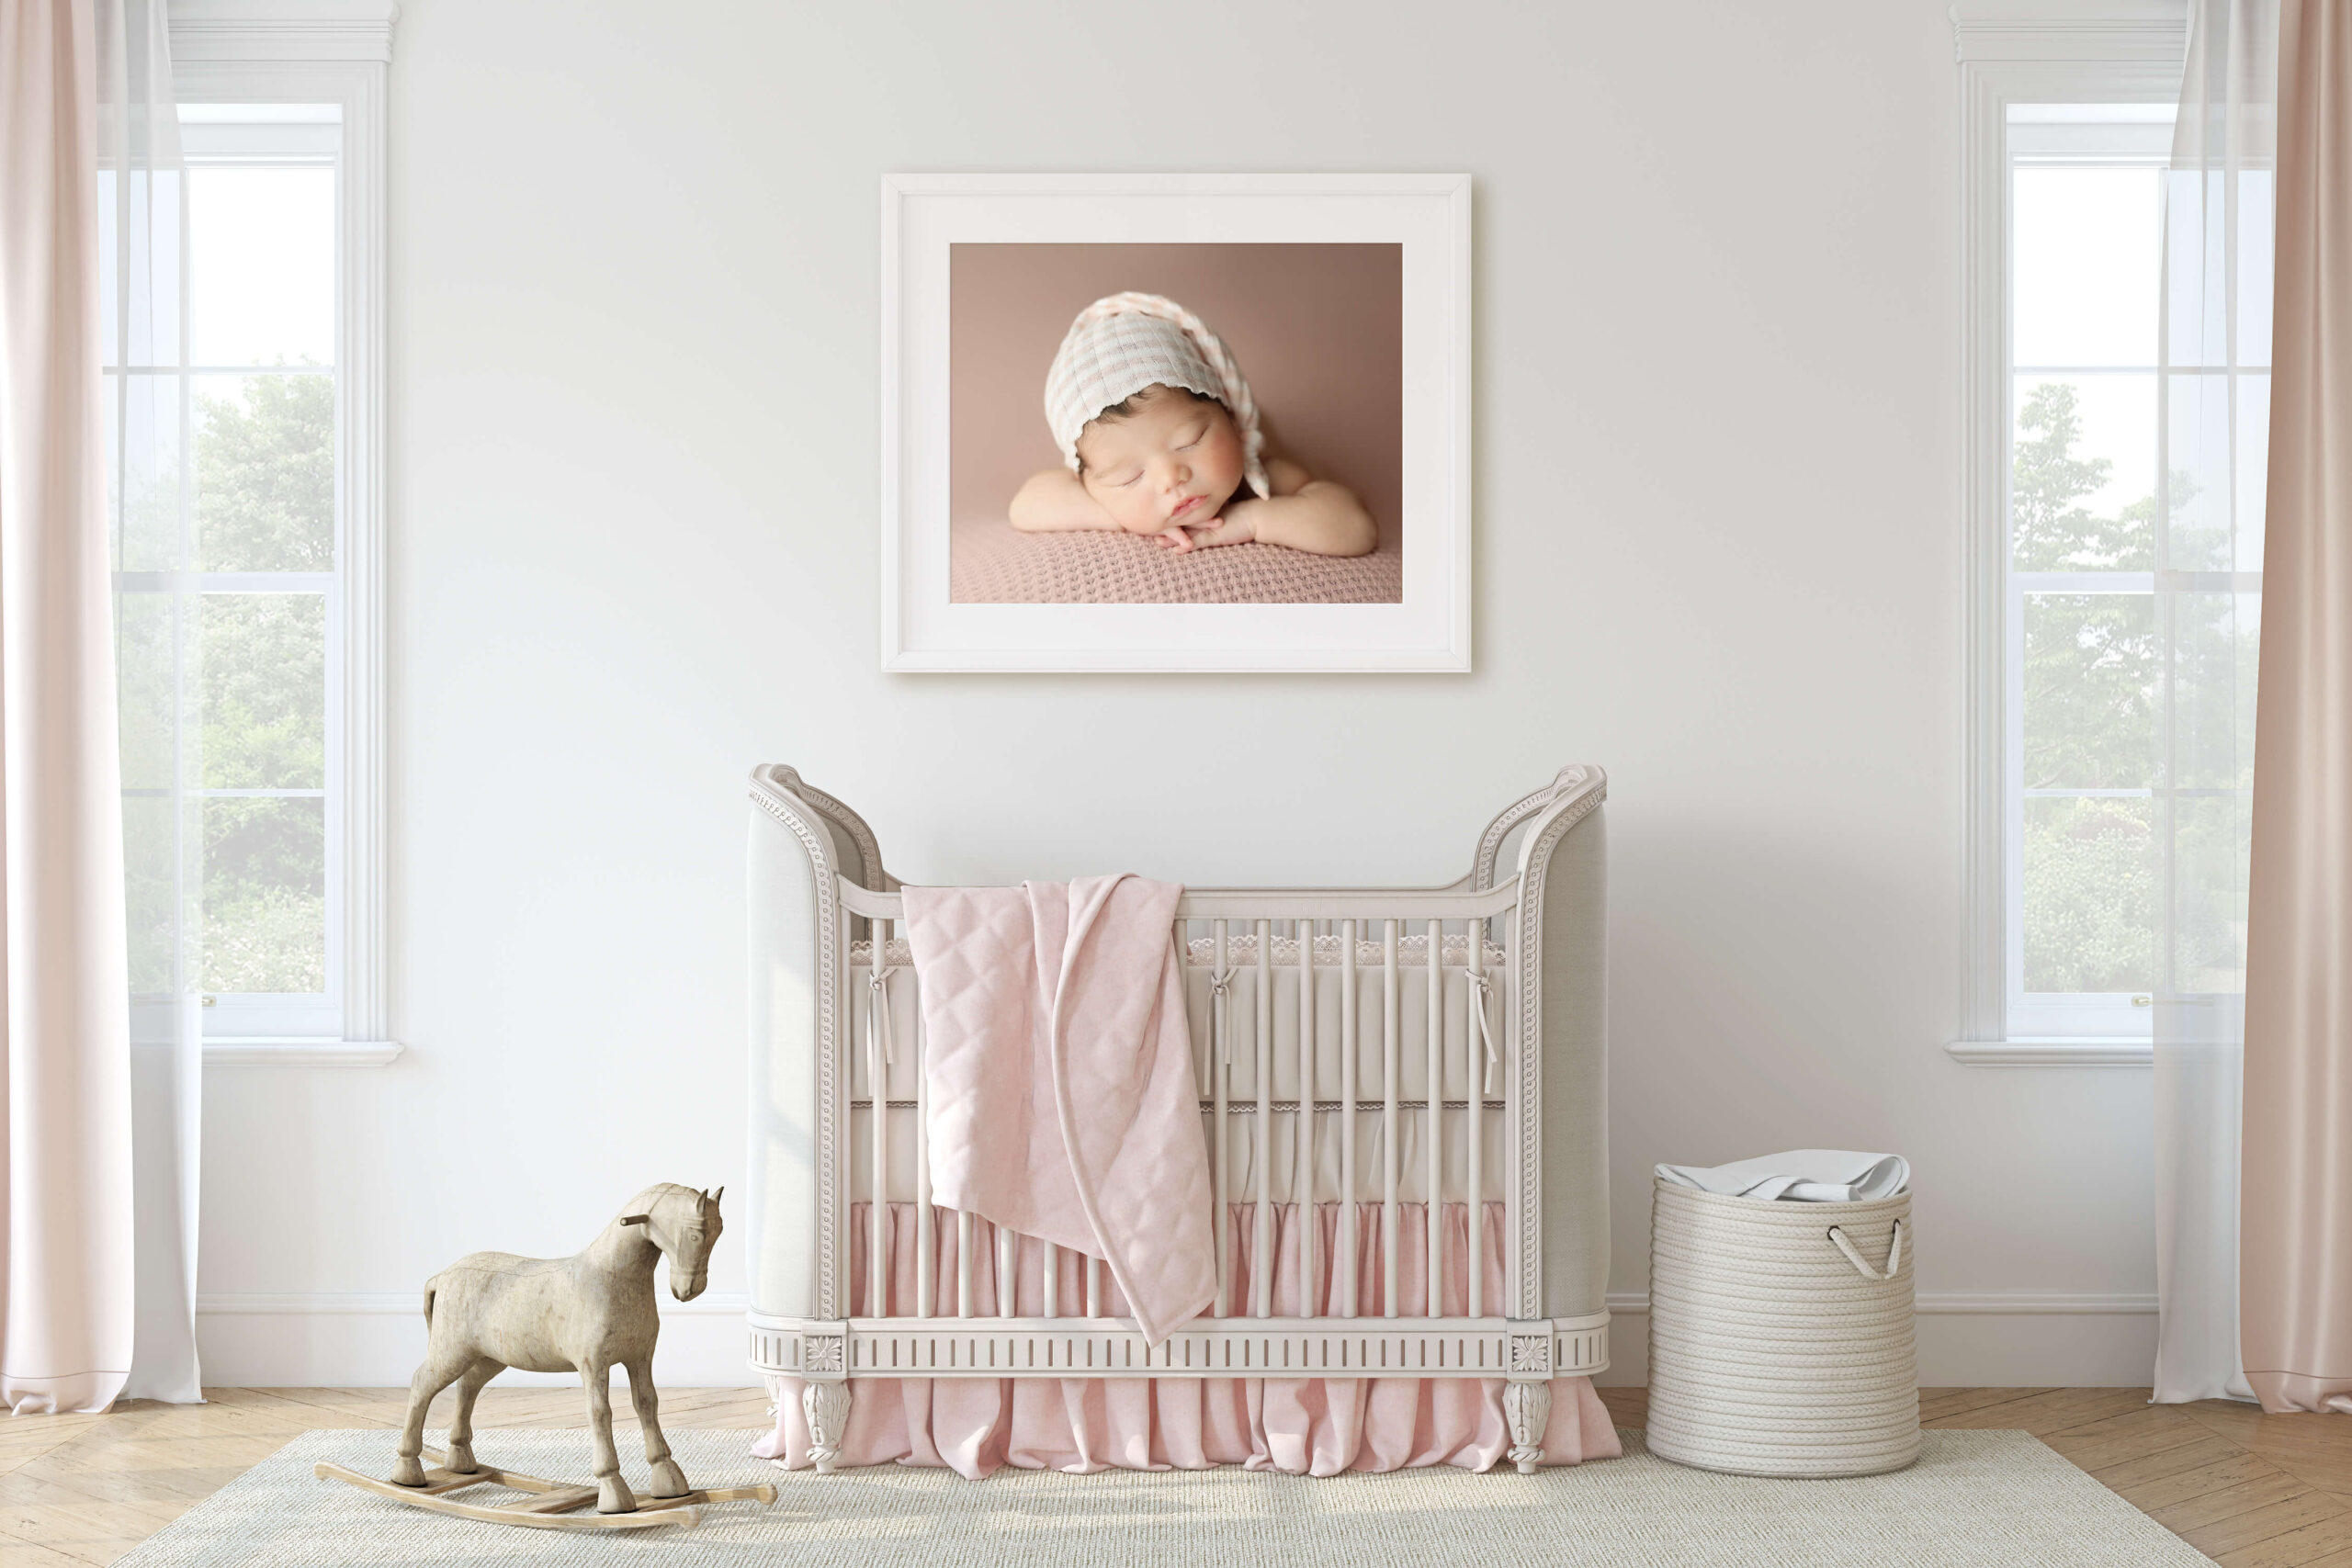 newborn girls nursery with a framed and printed newborn photo on the wall from Newborn Photography Studios that offer Printed Products